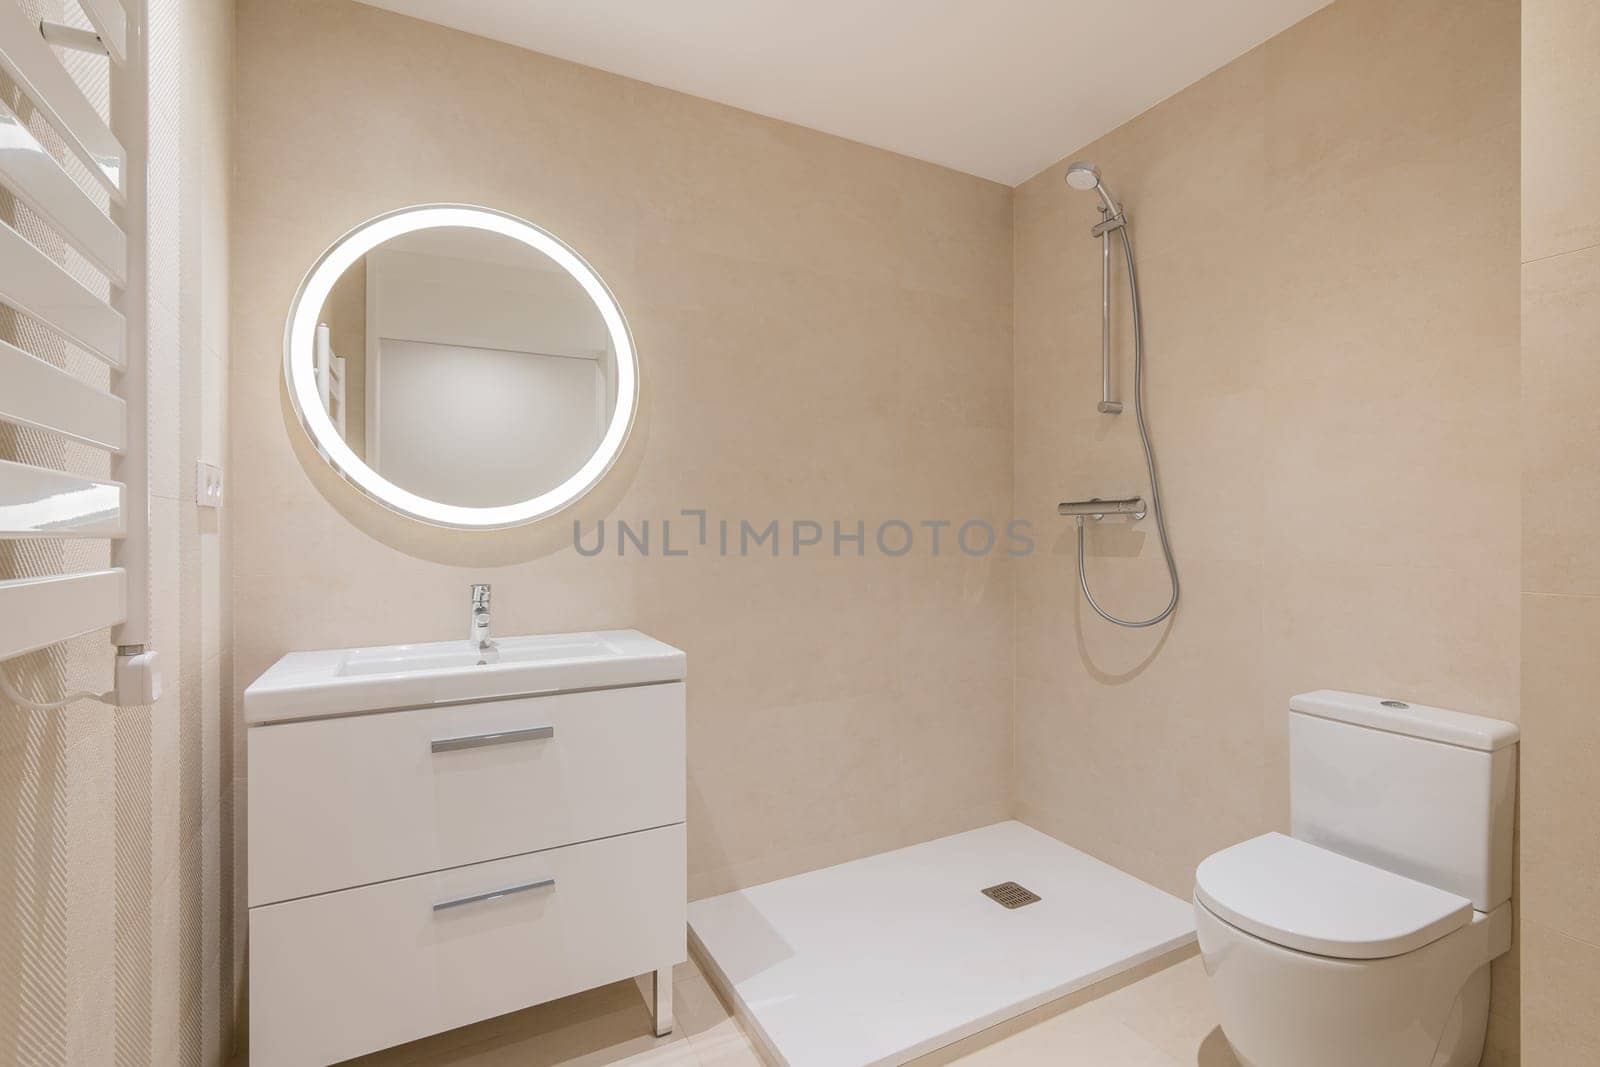 Bathroom with toilet bowl, shower area and washbasin with drawer and mirror above. Minimalistic medium-sized bathroom with essentials